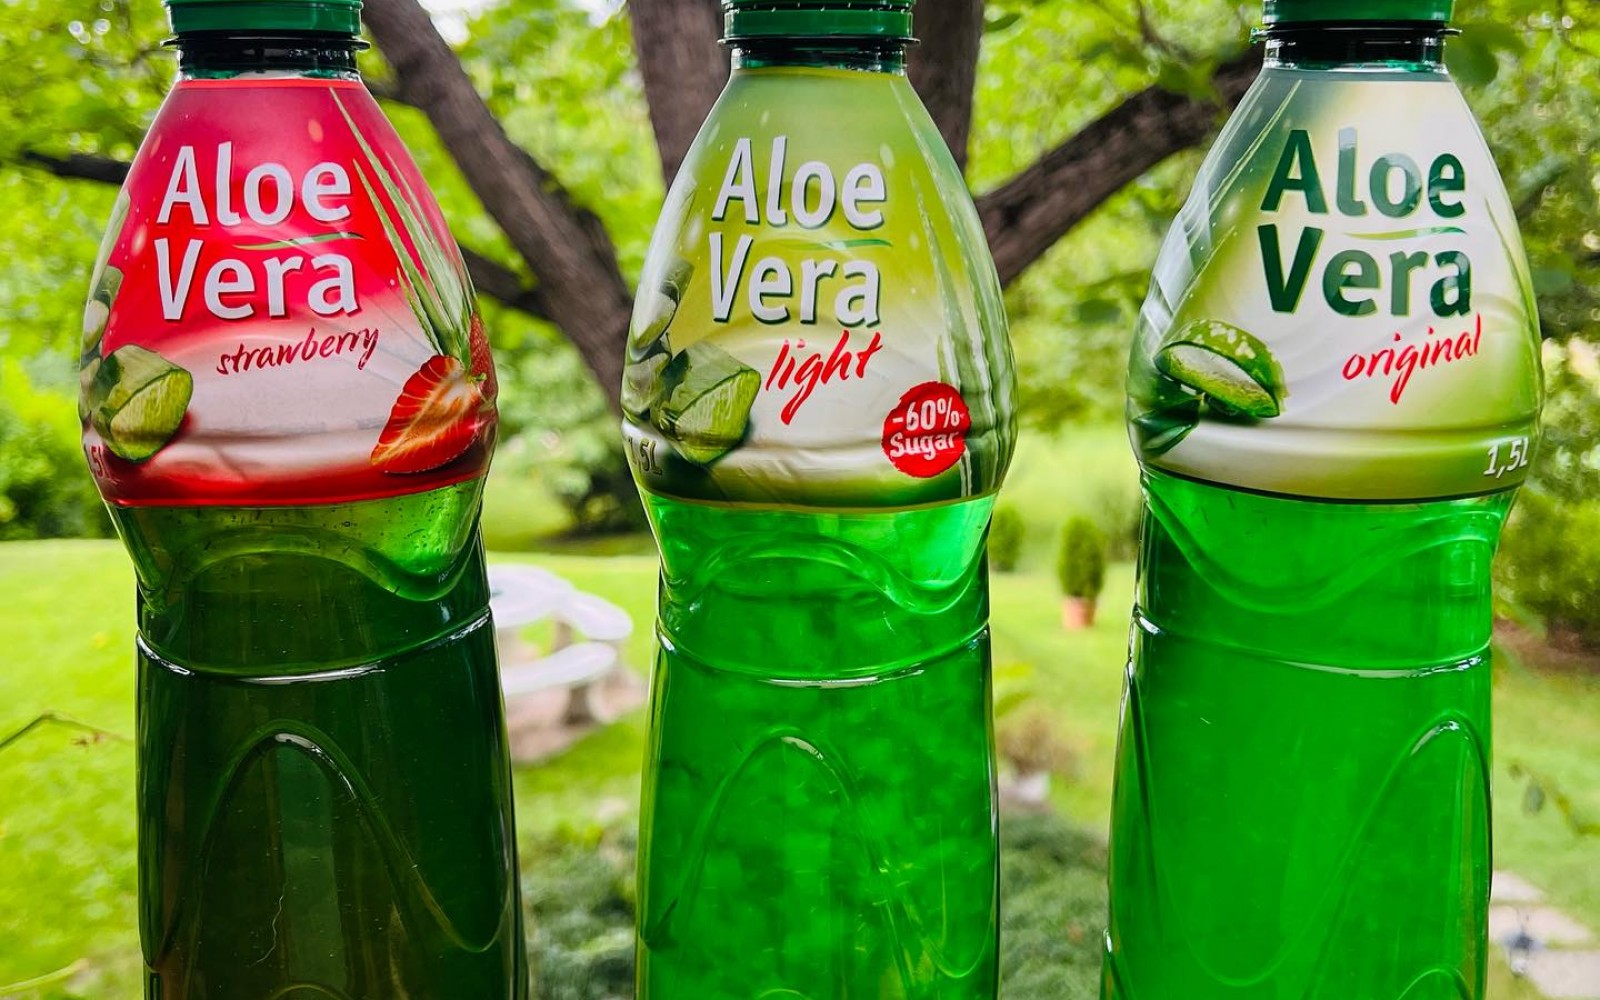 The light version of this Aloe vera delicacy contains 60% less sugar